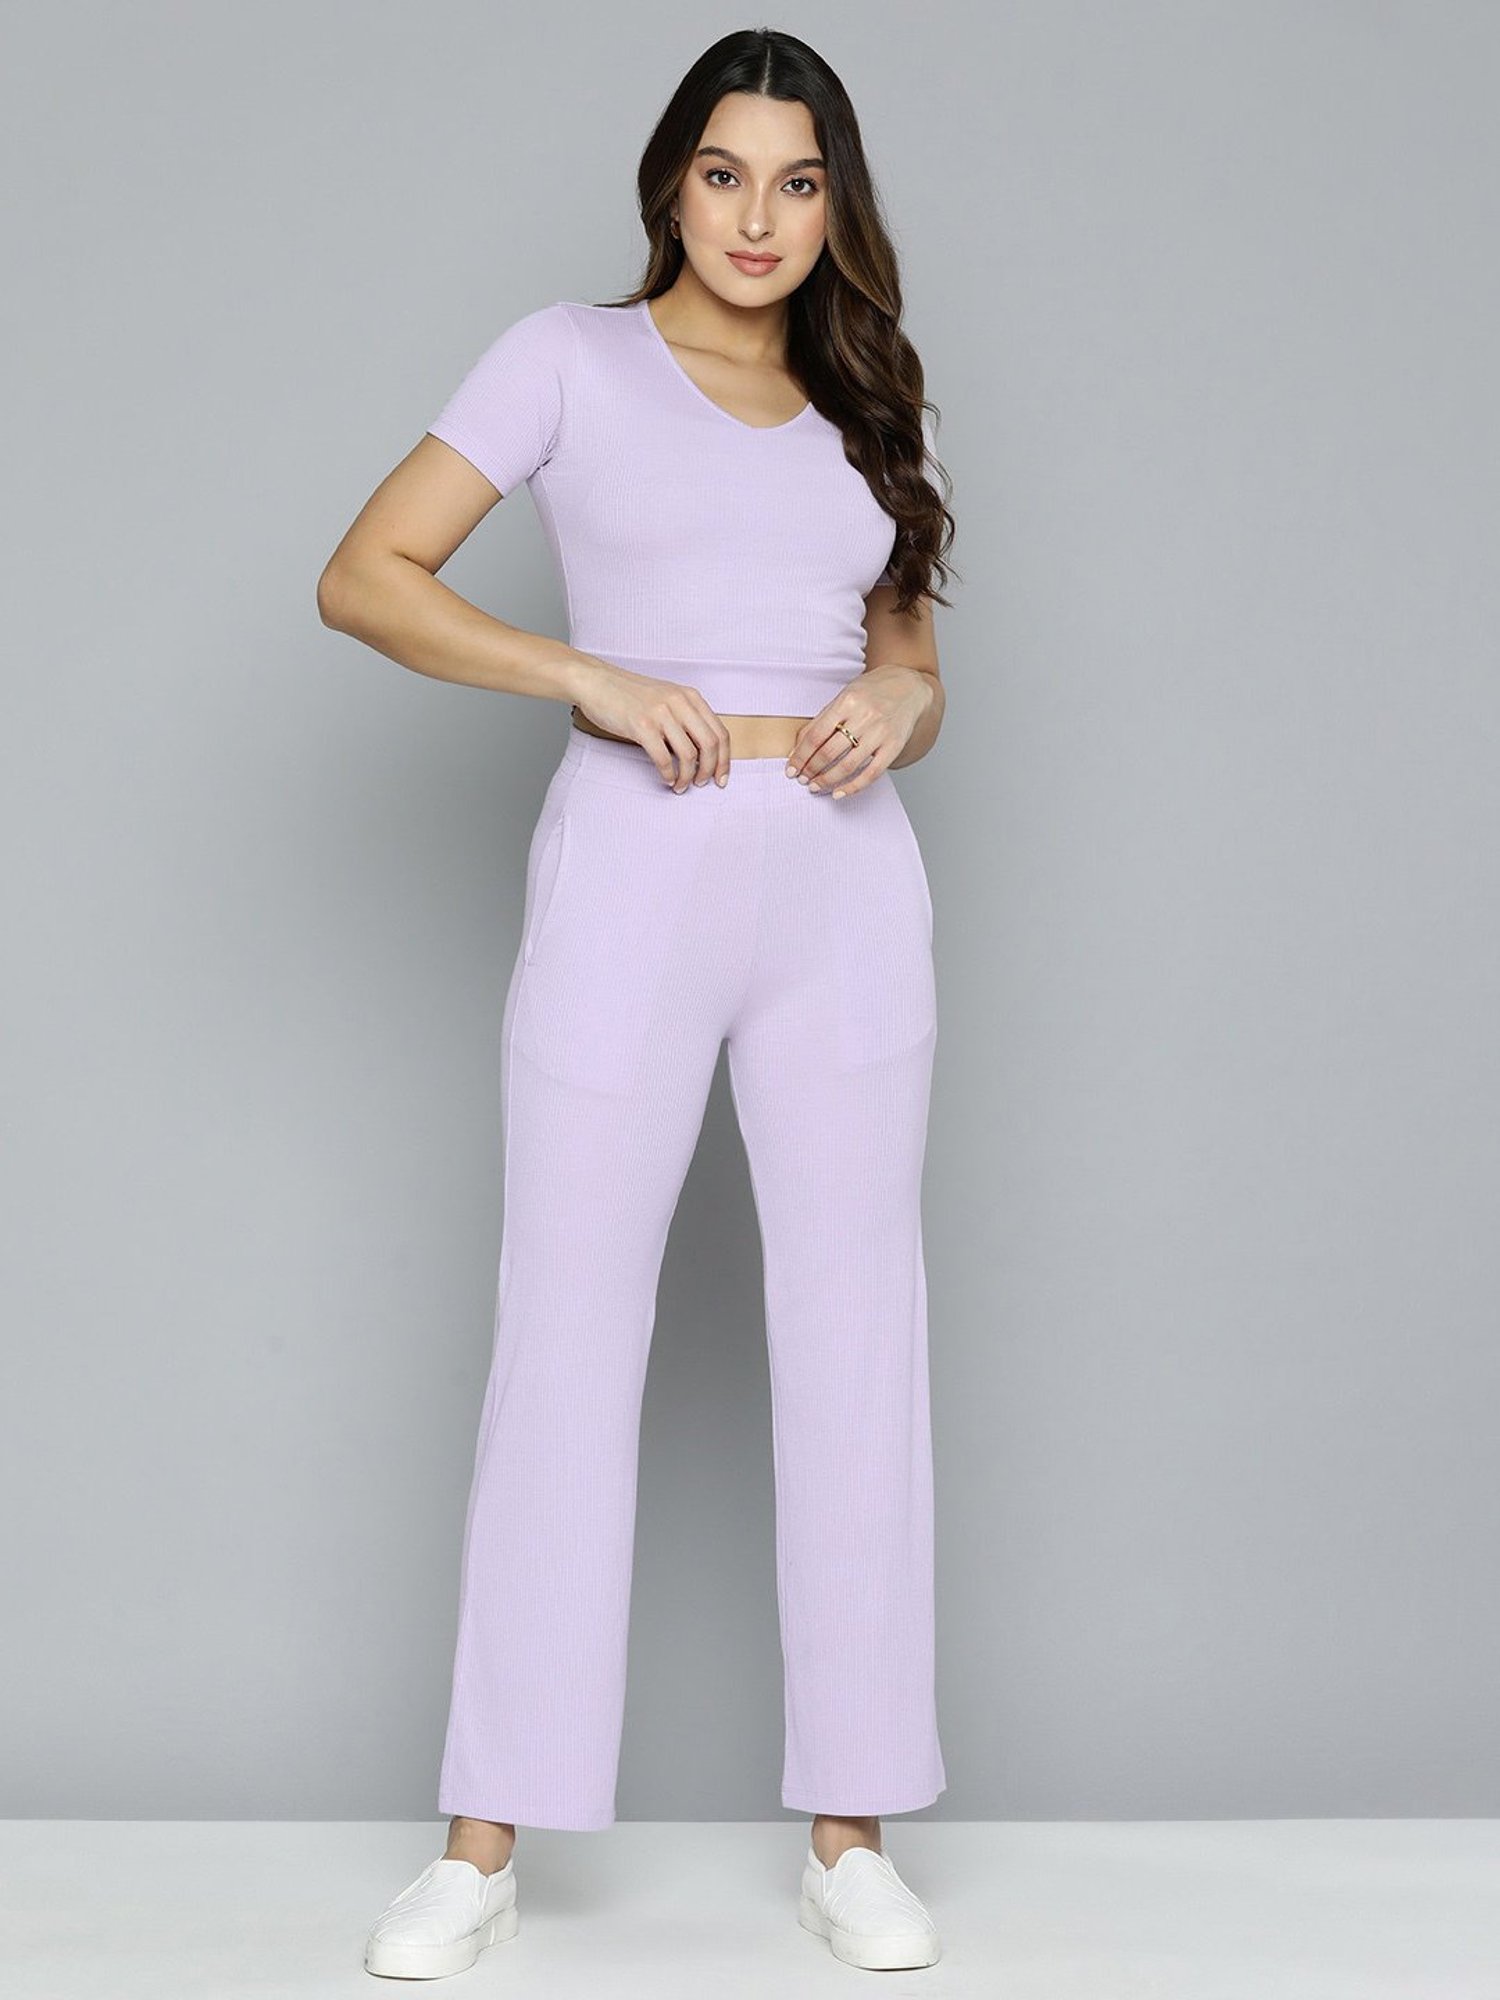 Ladies Crop Top And Trouser Set Manufacturer Supplier from Delhi India